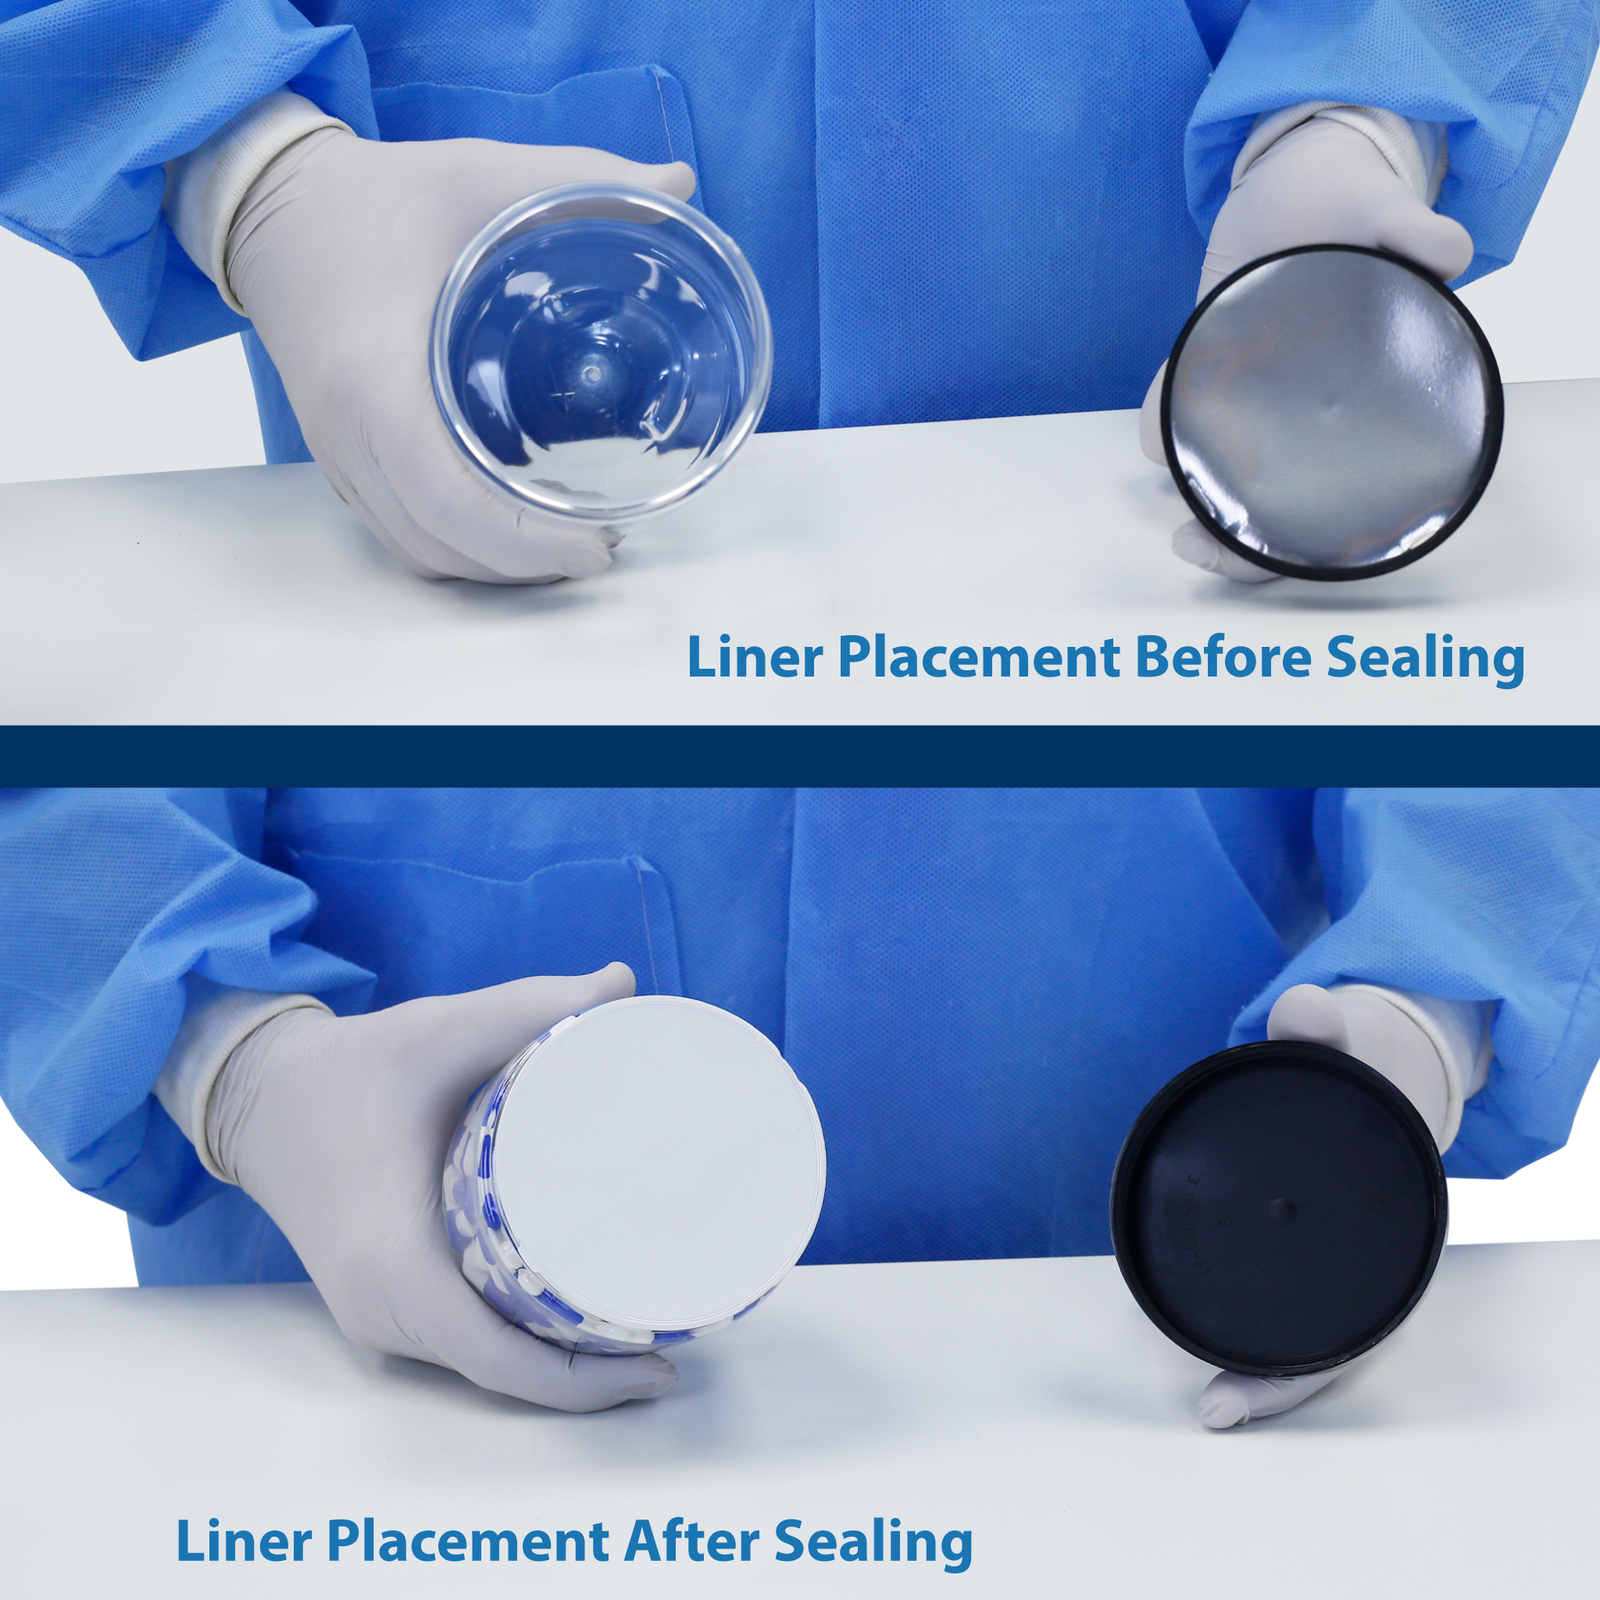 Placement of the induction liner inside a cap before it has been sealed and the liner attached to the container after it has been sealed